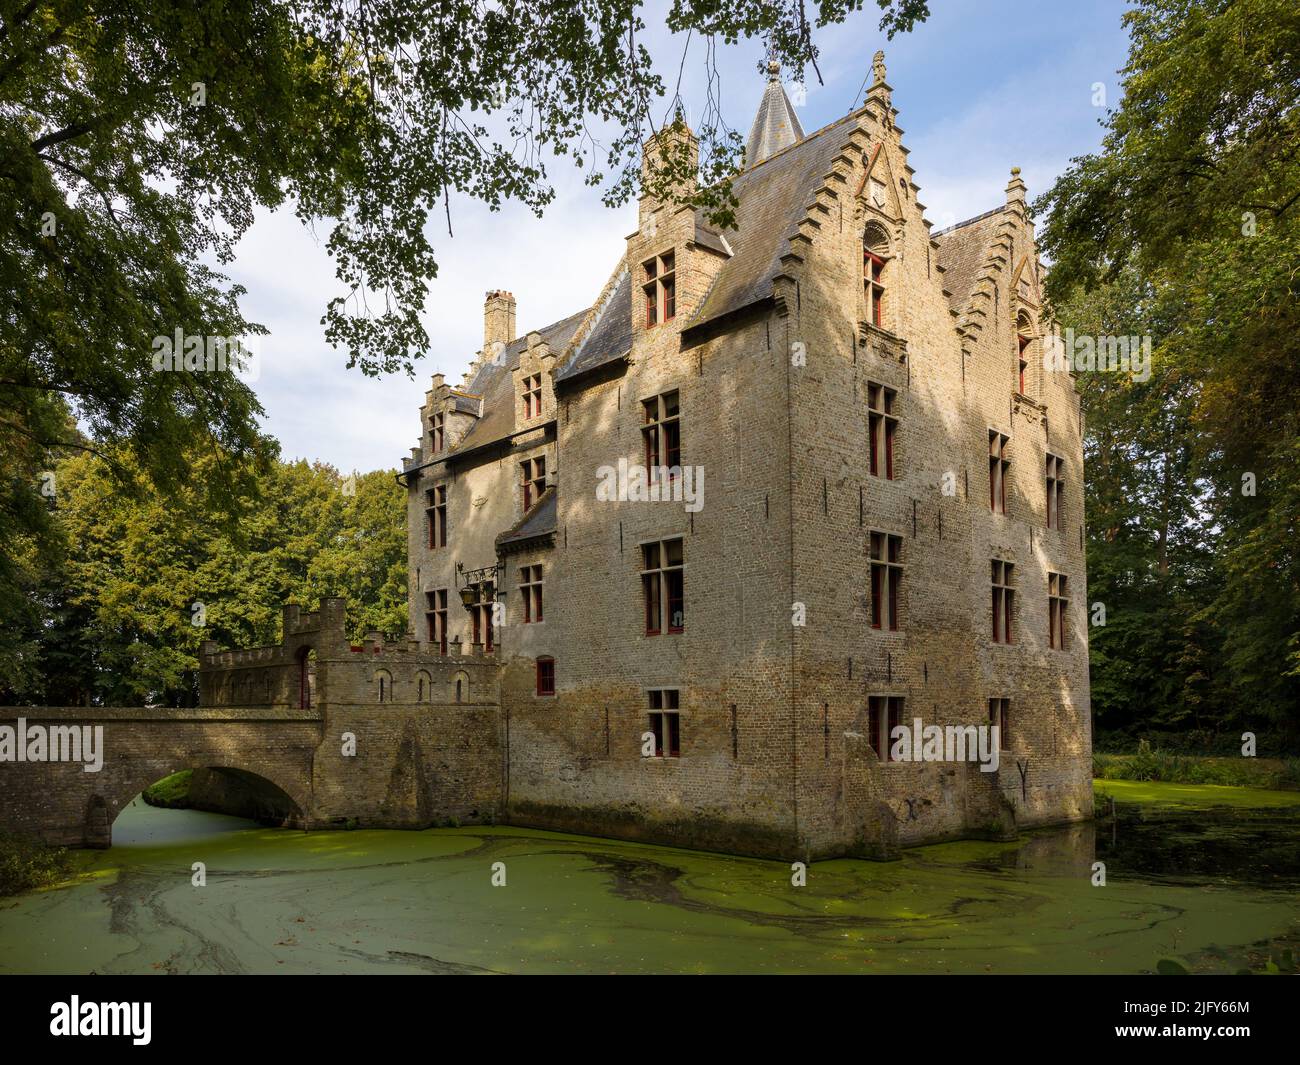 Hidden in a quiet park lies a beautiful medieval castle, built in the 16th century, in Flanders, Belgium Stock Photo